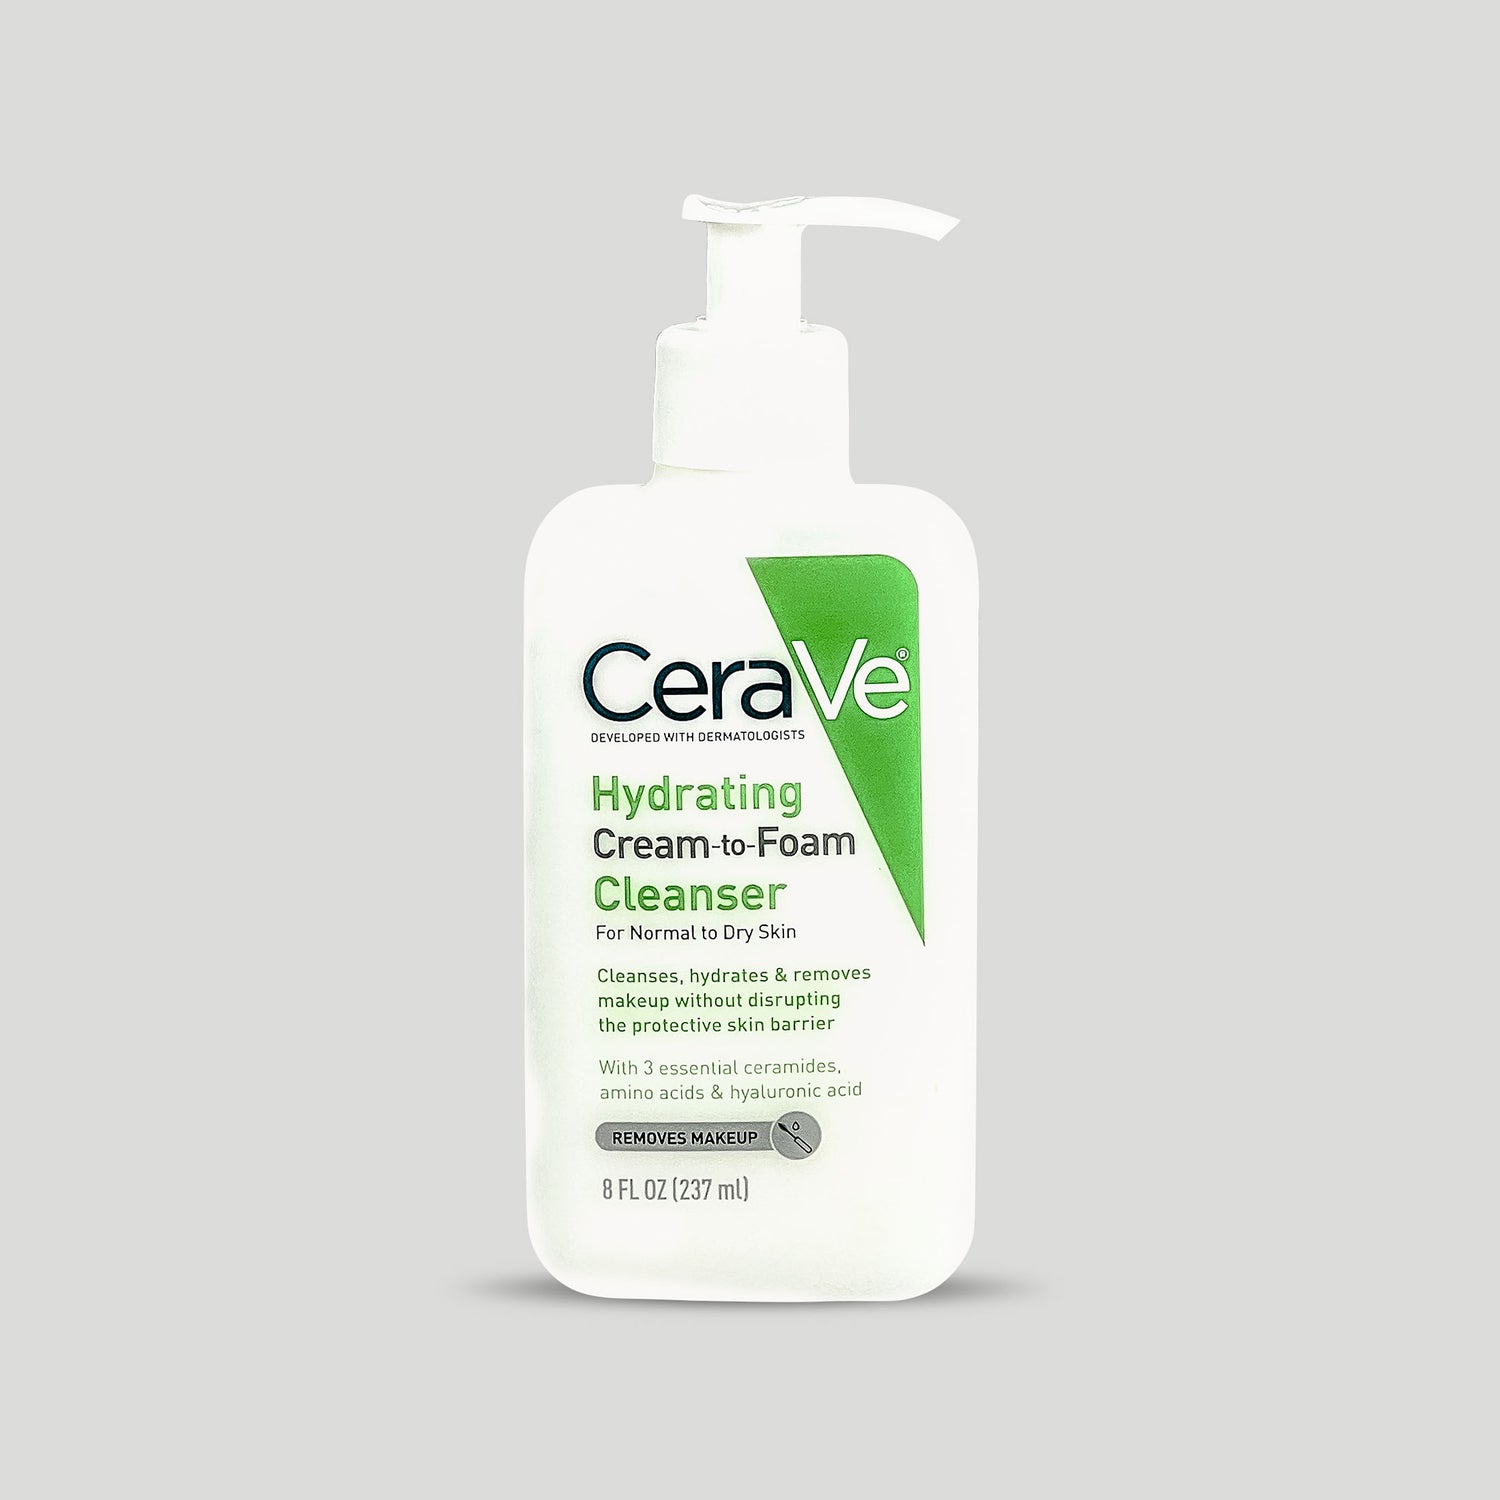 CeraVe Hydrating Cream to Foam Facial Cleanser